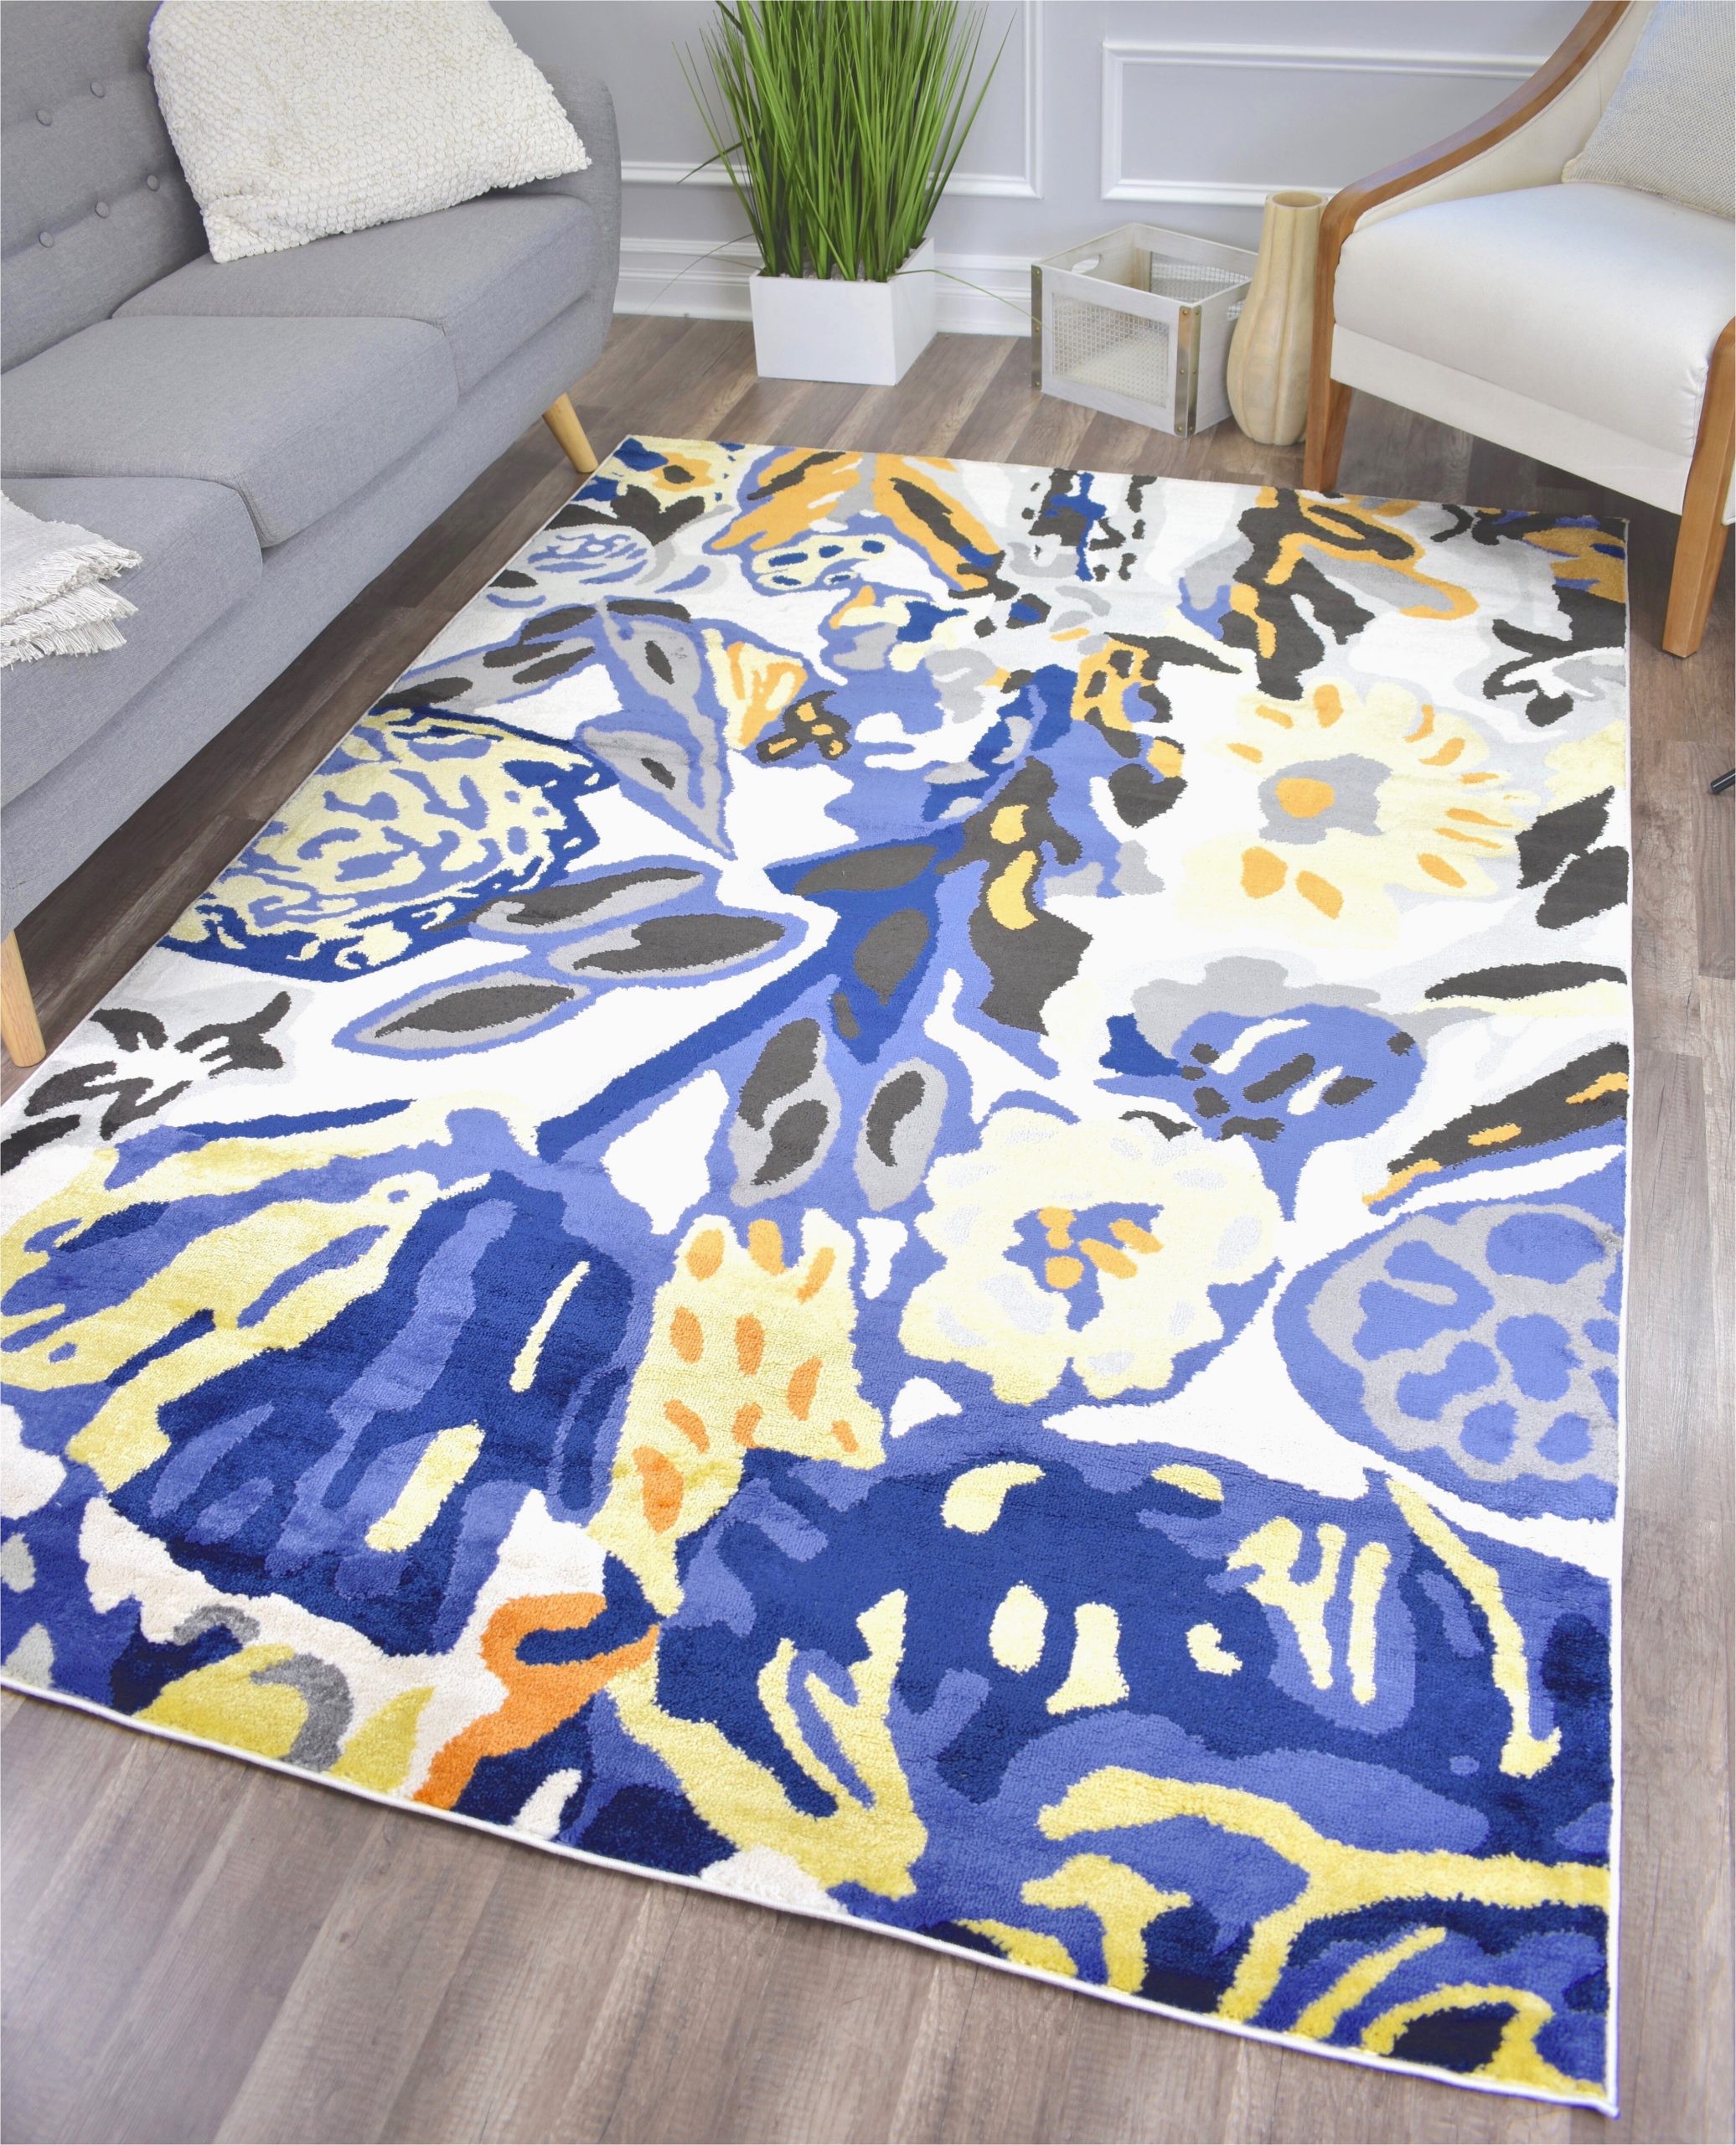 Blue and Yellow Throw Rugs Vizcaino Pearl Contemporary Floral Yellow Blue Black area Rug